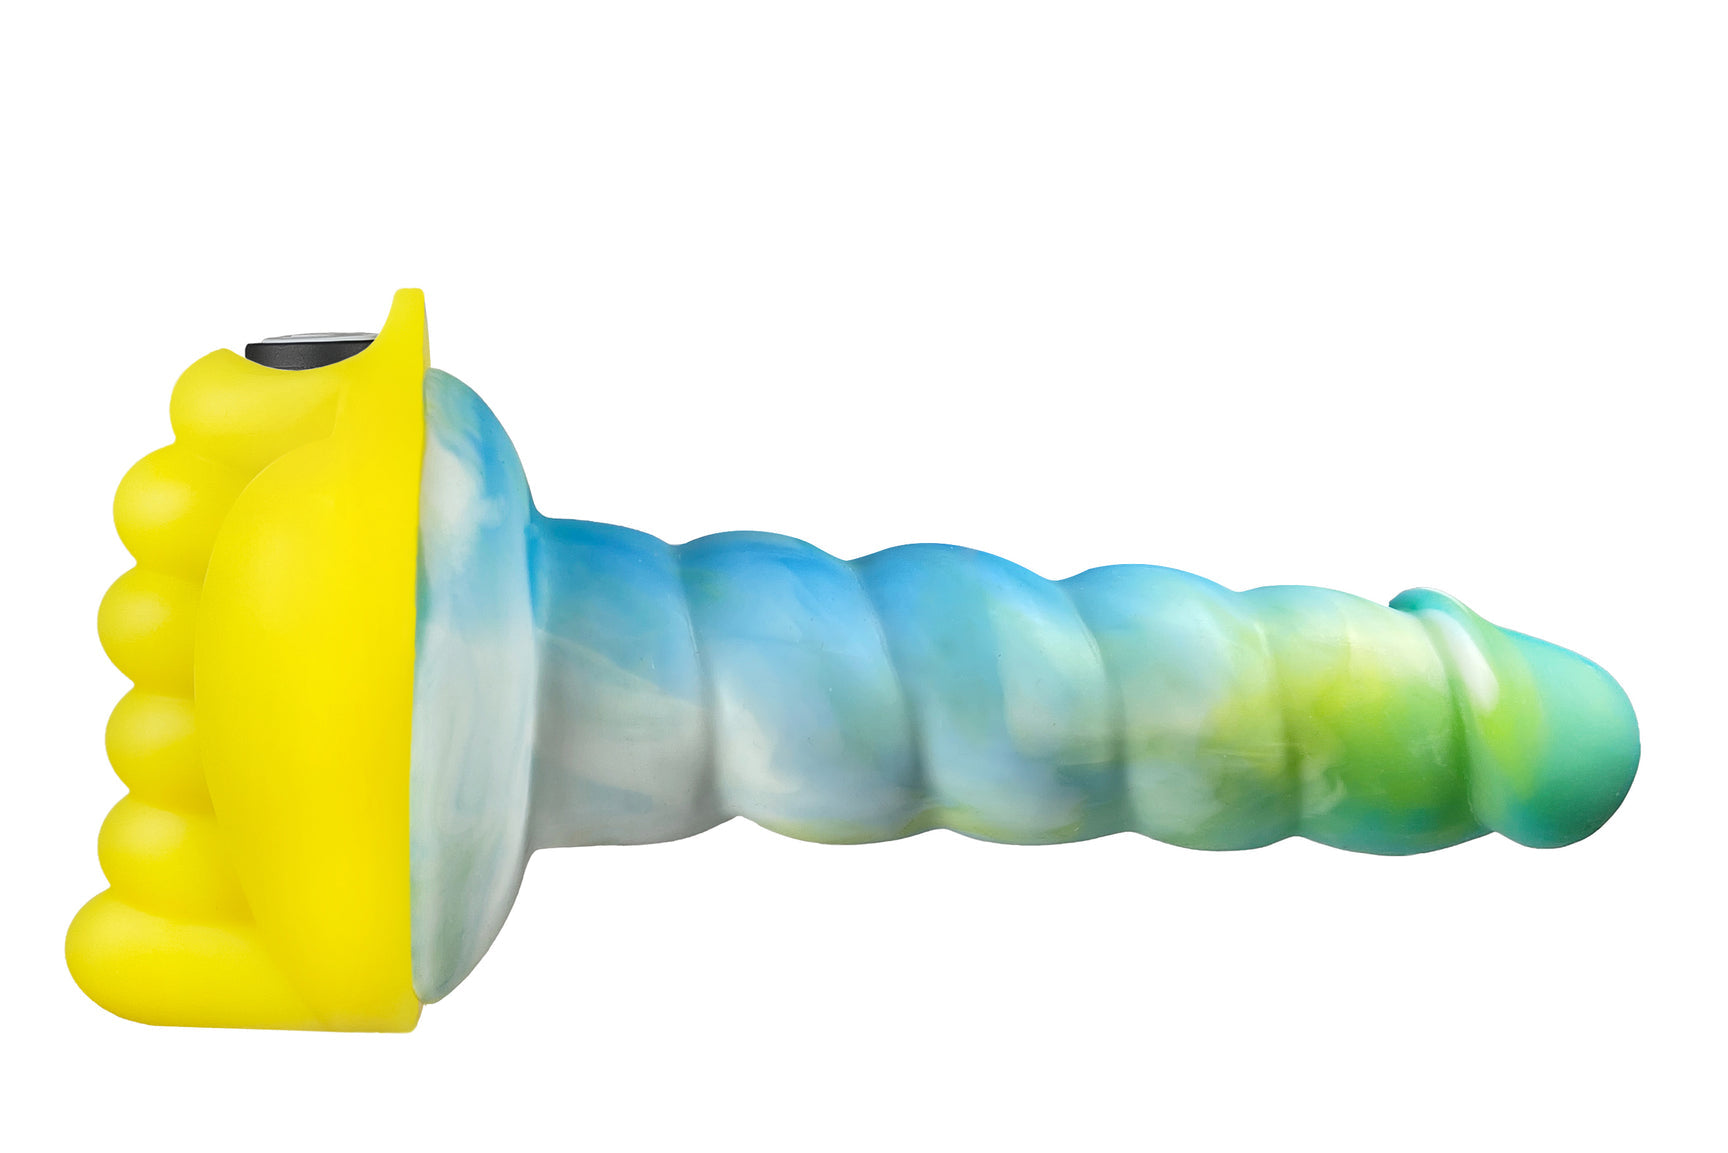 Yellow silicone stimulating cushion with bumps stuck on the flat end of a pale blue silicone dildo Nudie Co